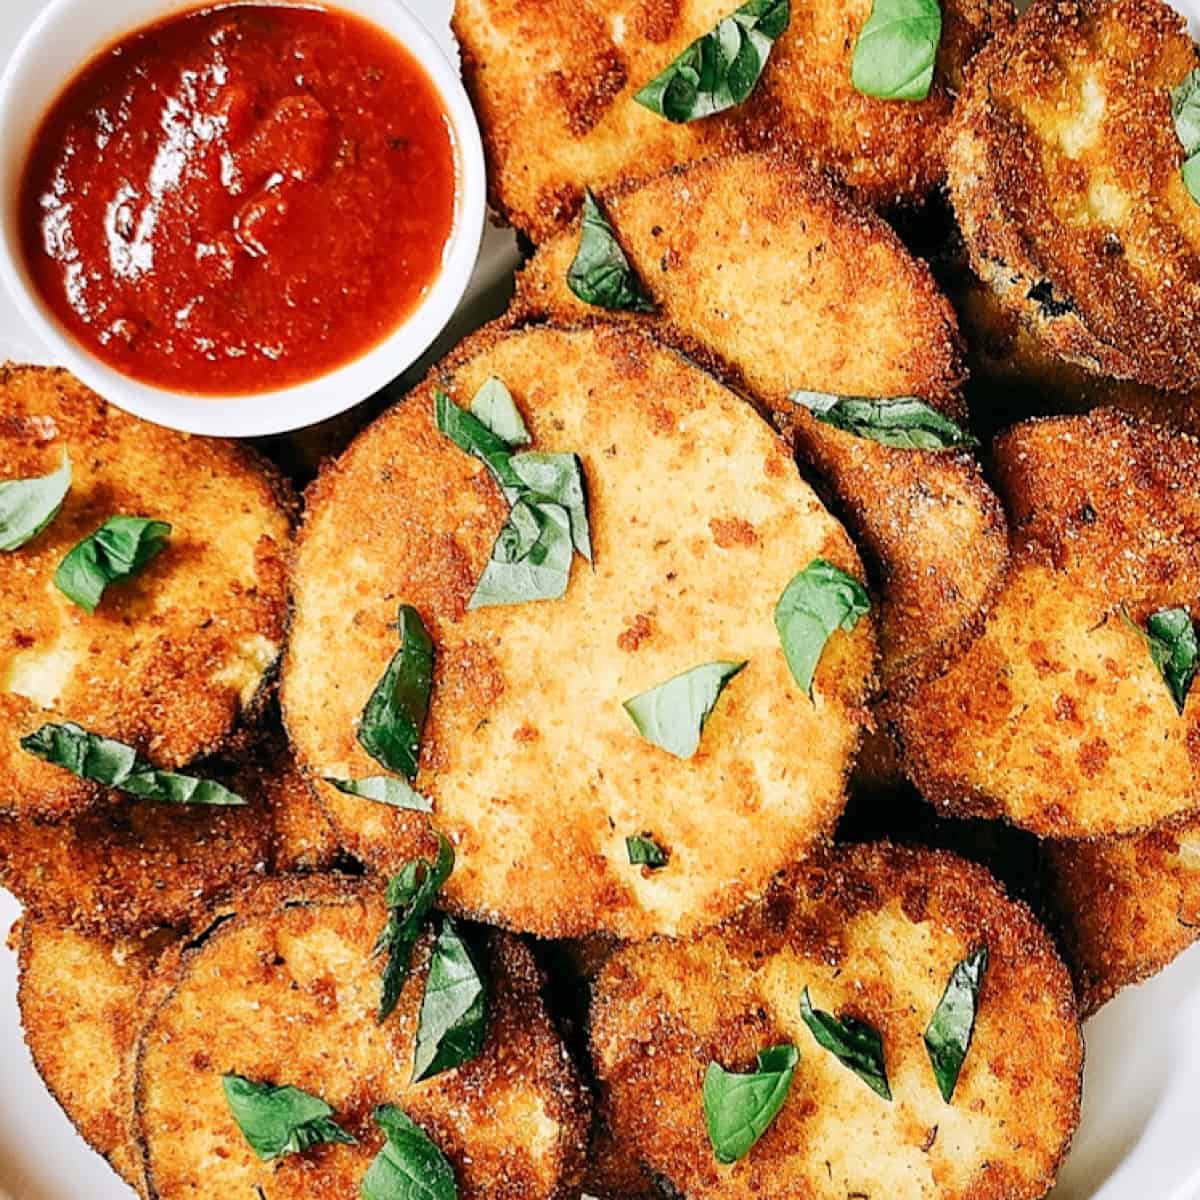 Fried eggplant in large white bowl with a side of marinara for dipped and topped with basil